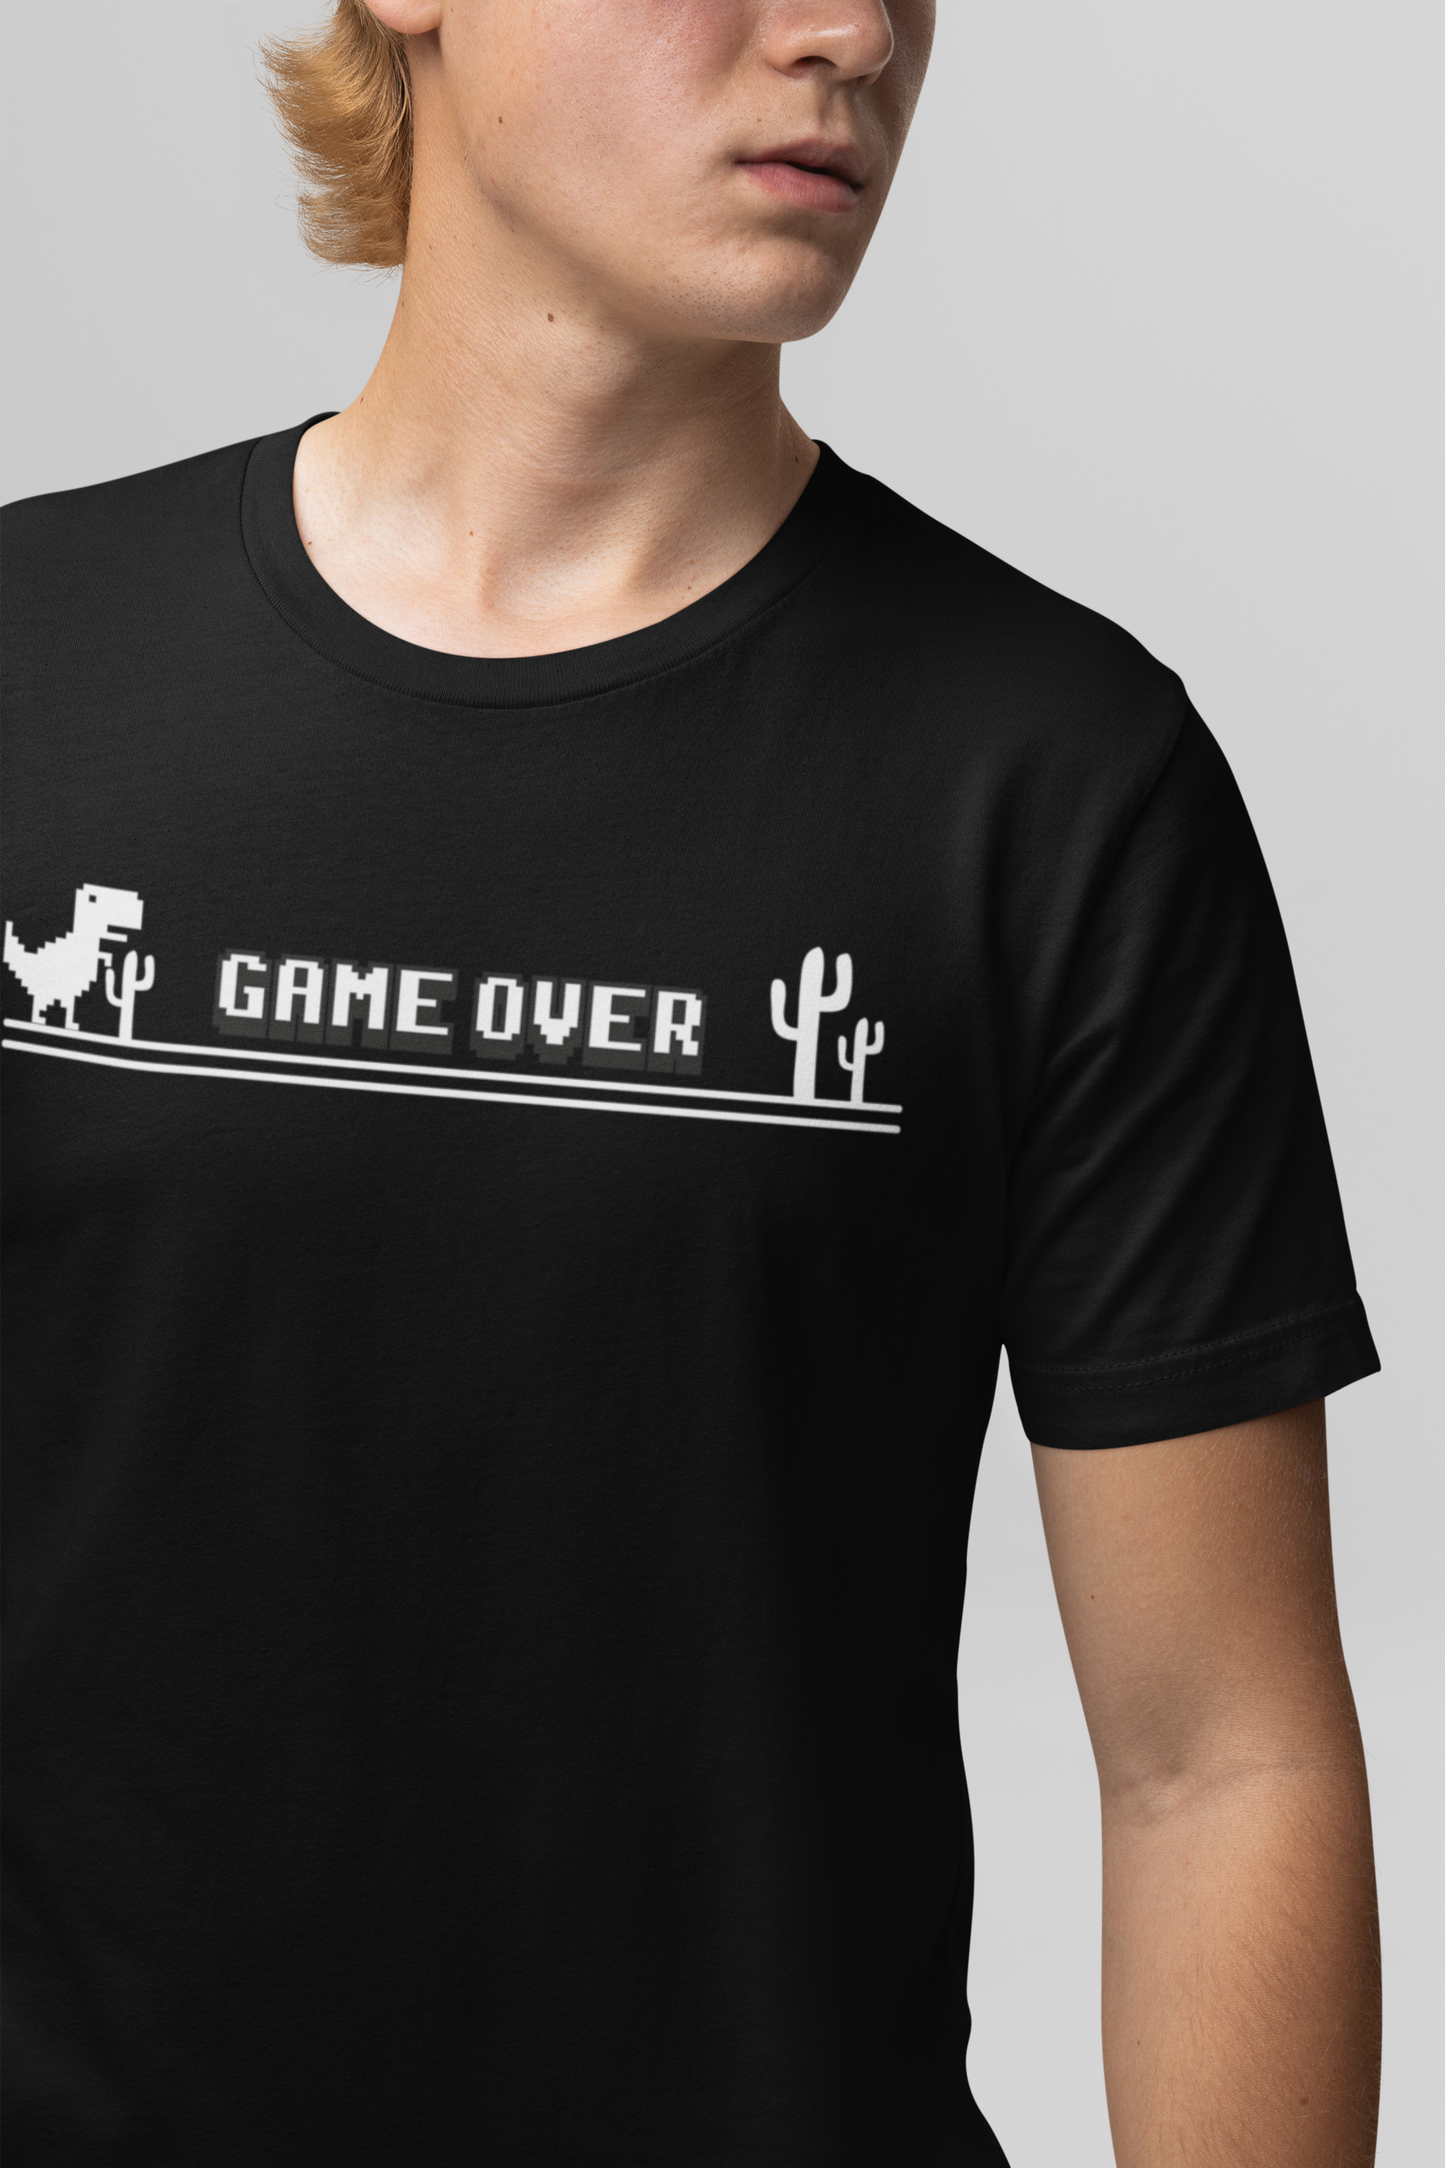 Printed T-Shirt - Game Over